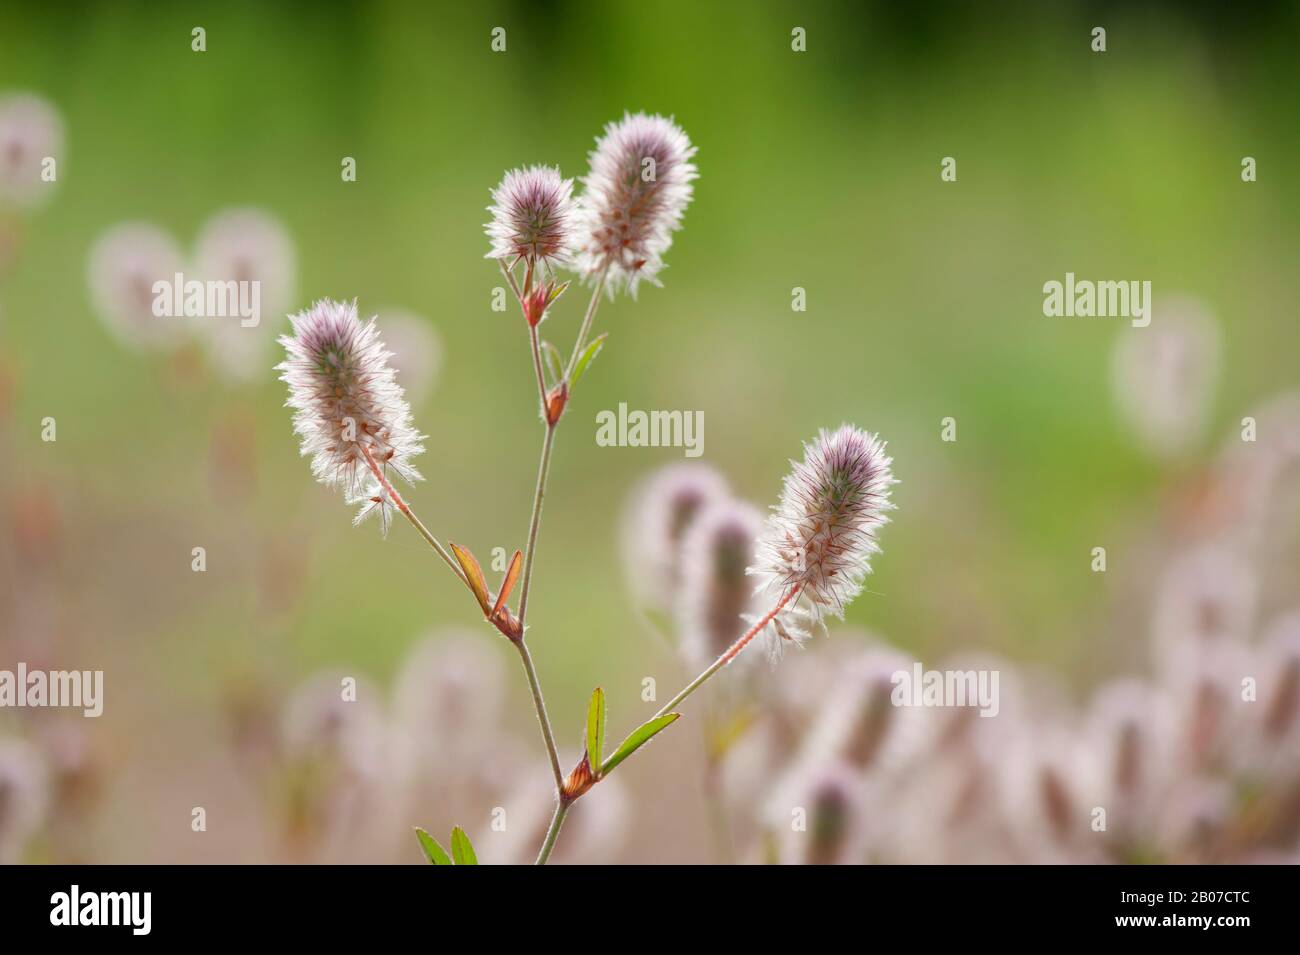 rabbit-foot clover, stone clover, hare's-foot clover (Trifolium arvense), blooming, Germany Stock Photo